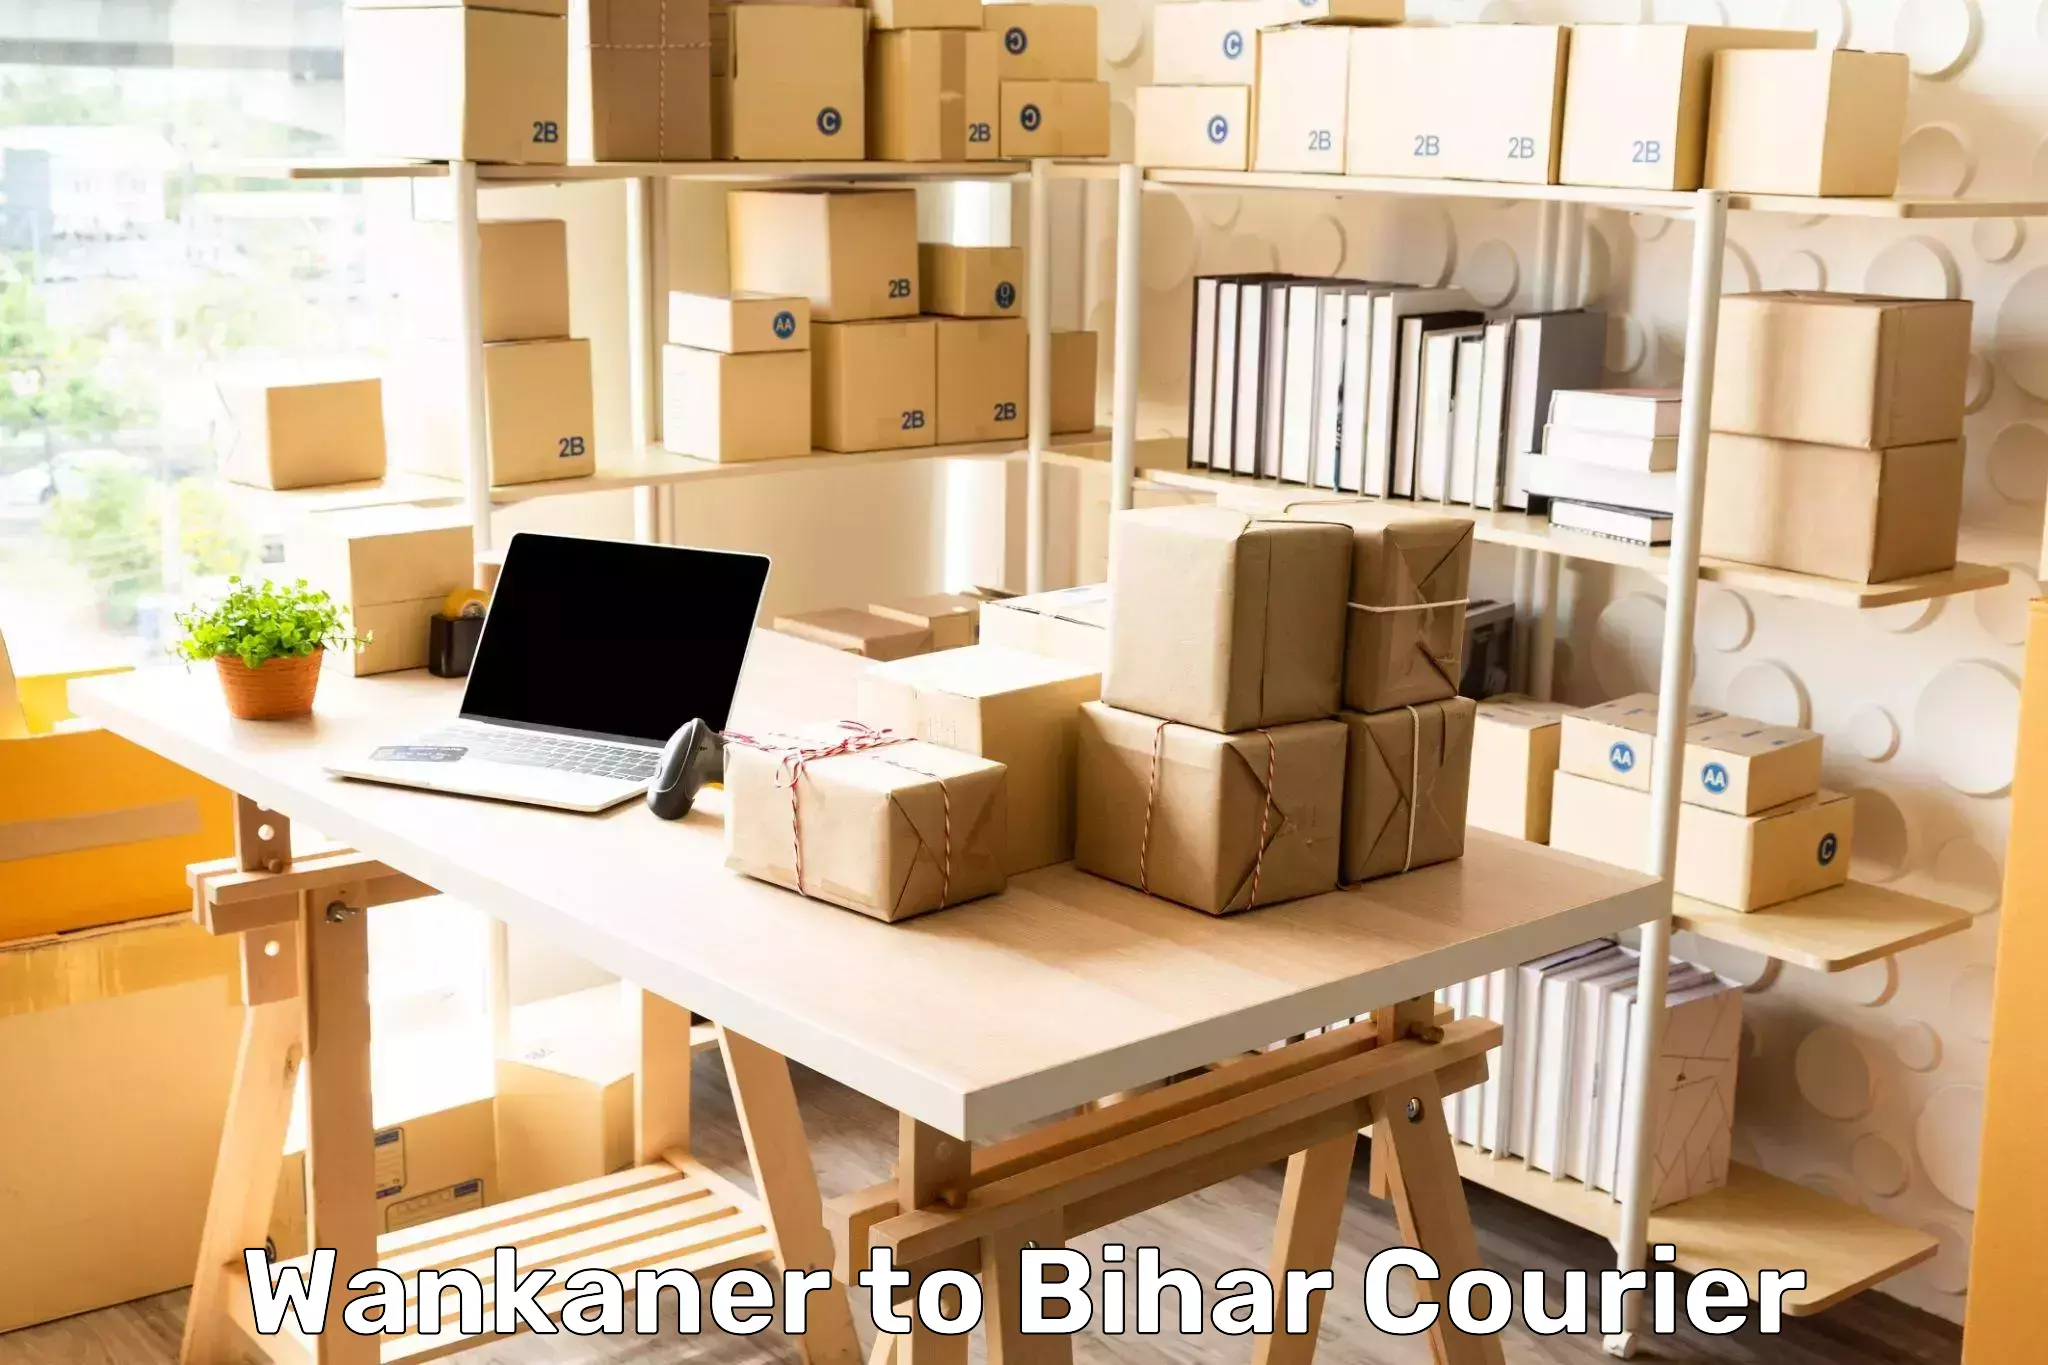 24-hour courier services in Wankaner to Sugauli